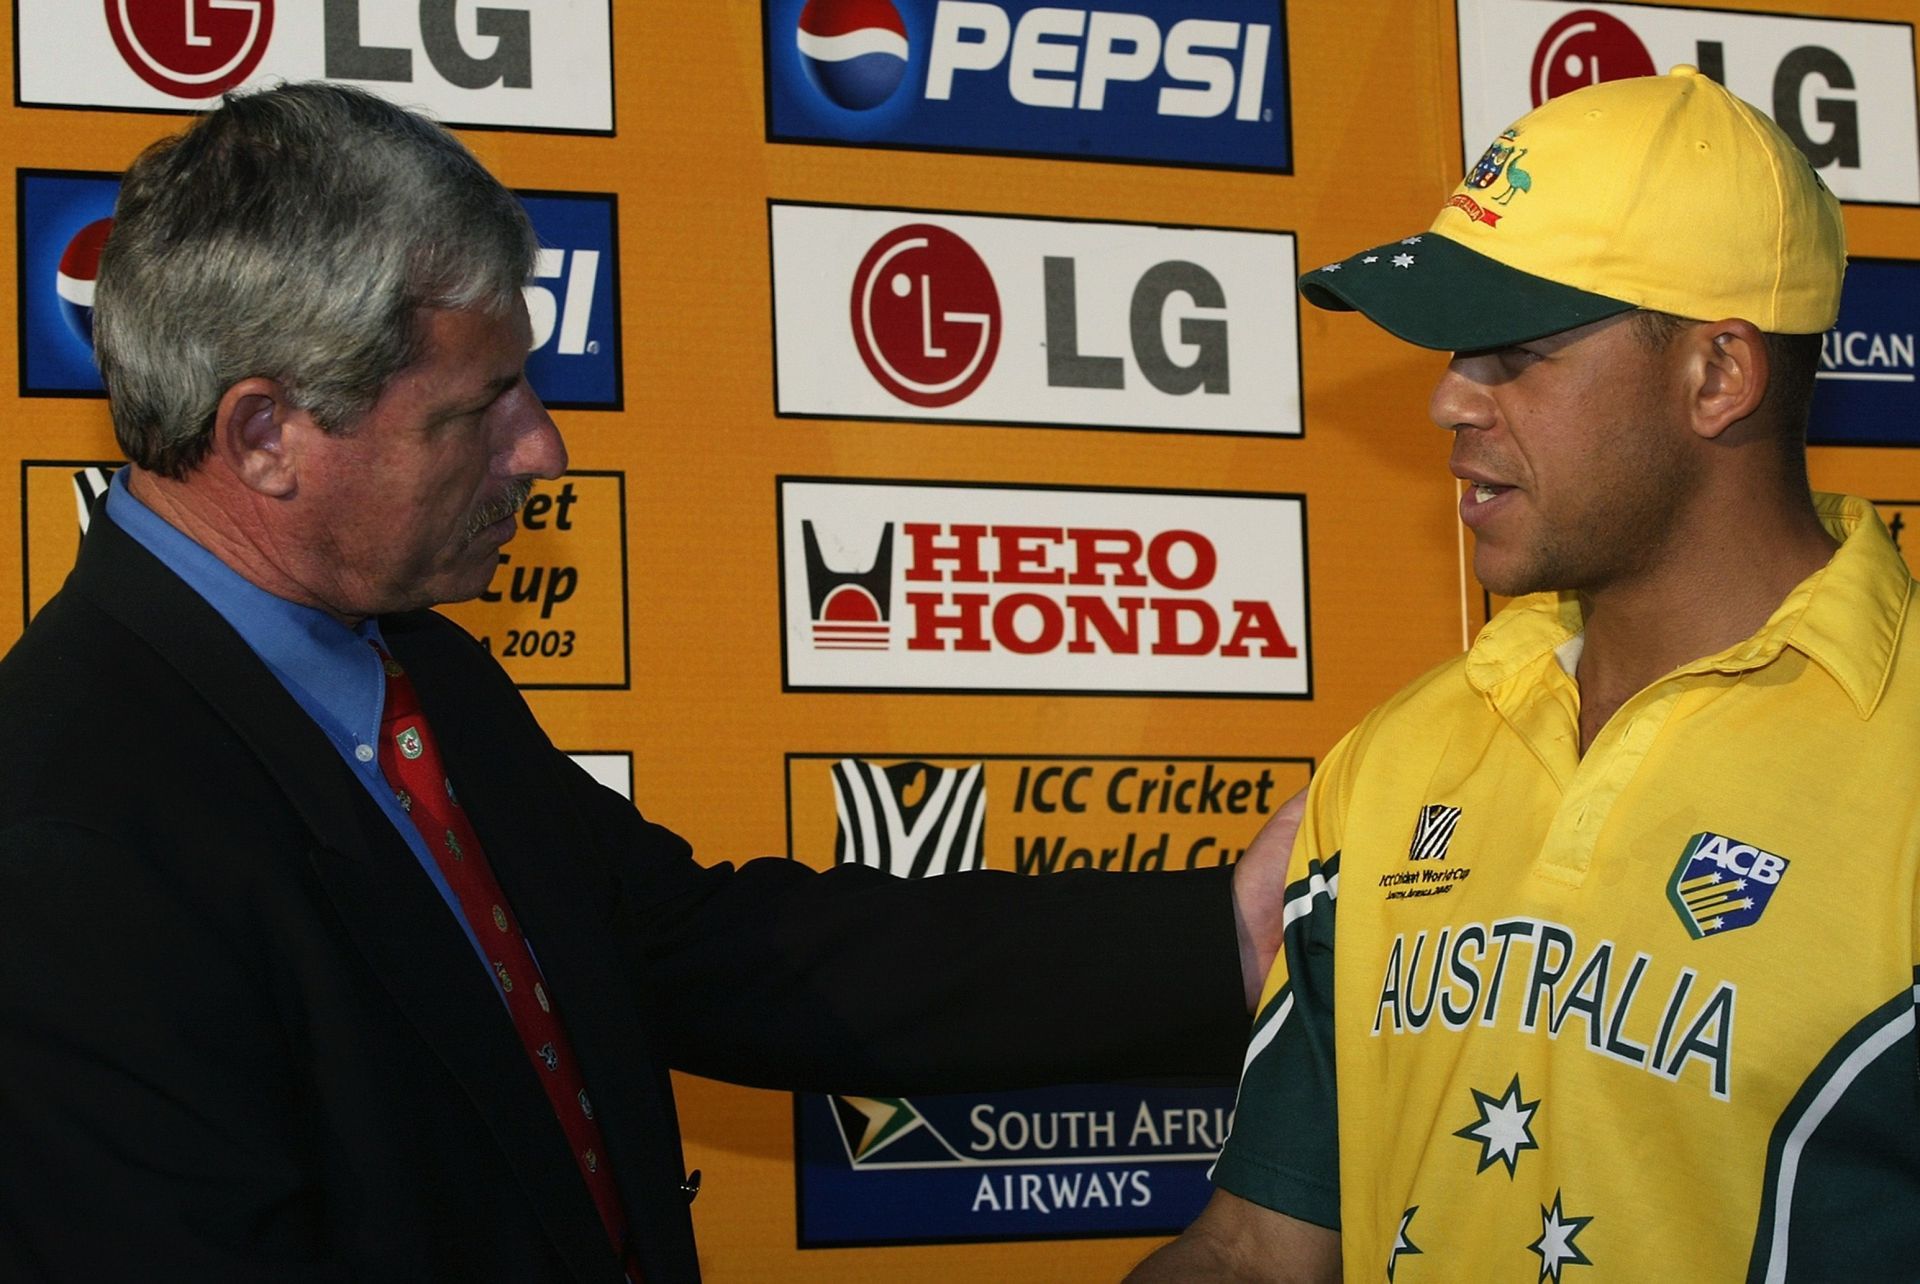 Andrew Symonds was named Man of the Match in the match against Pakistan in 2003 World Cup